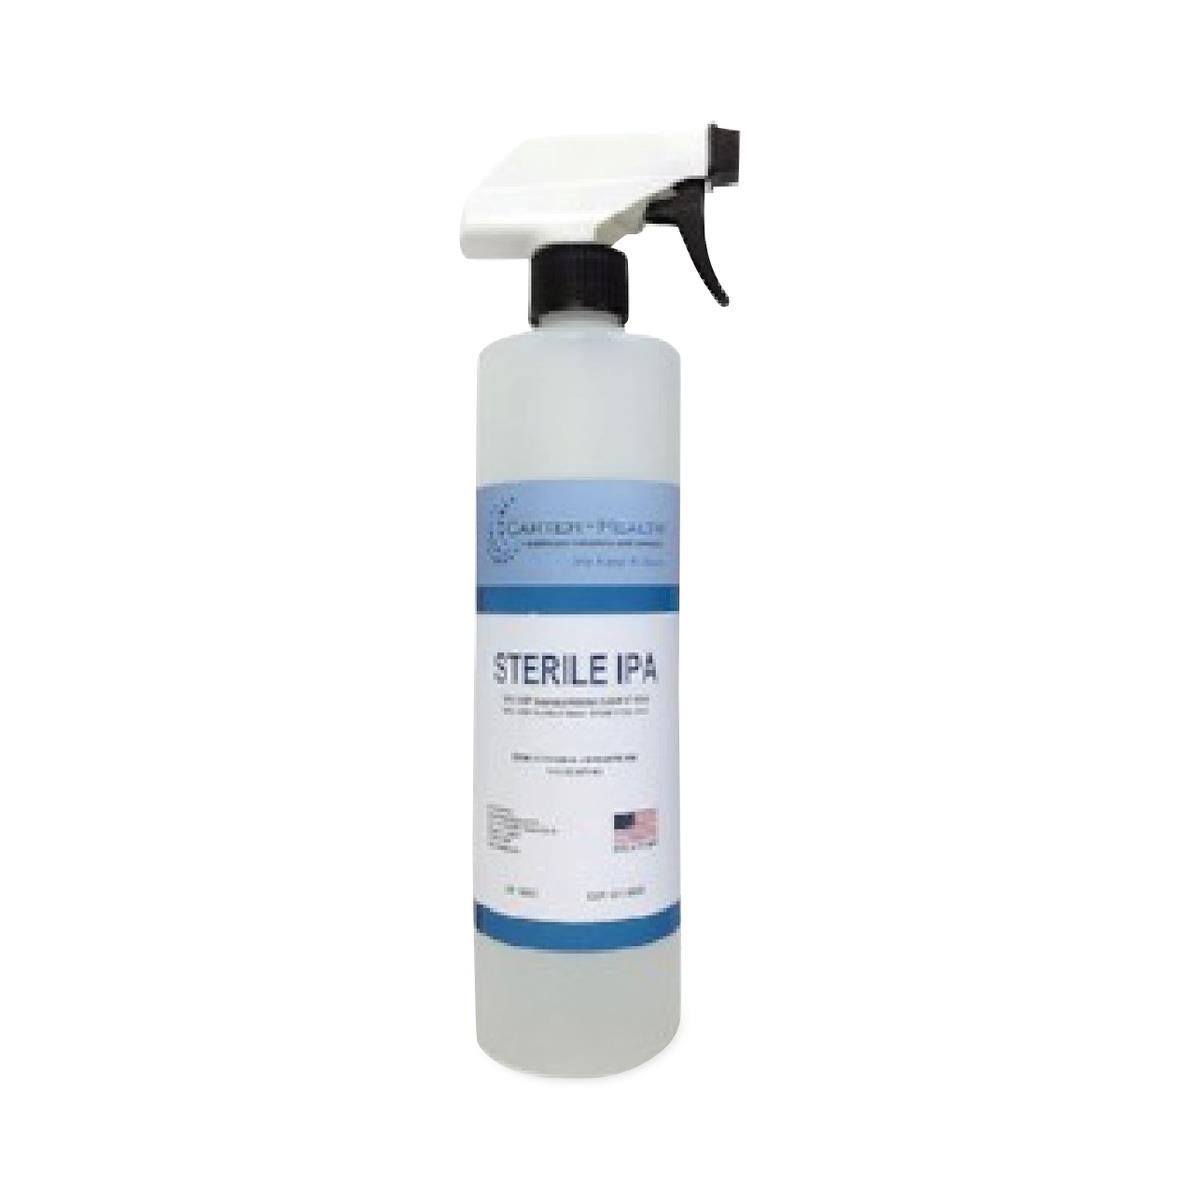 Sterile 70% Isopropyl Alcohol Squirt Bottle, Alcohol Squirt Bottle